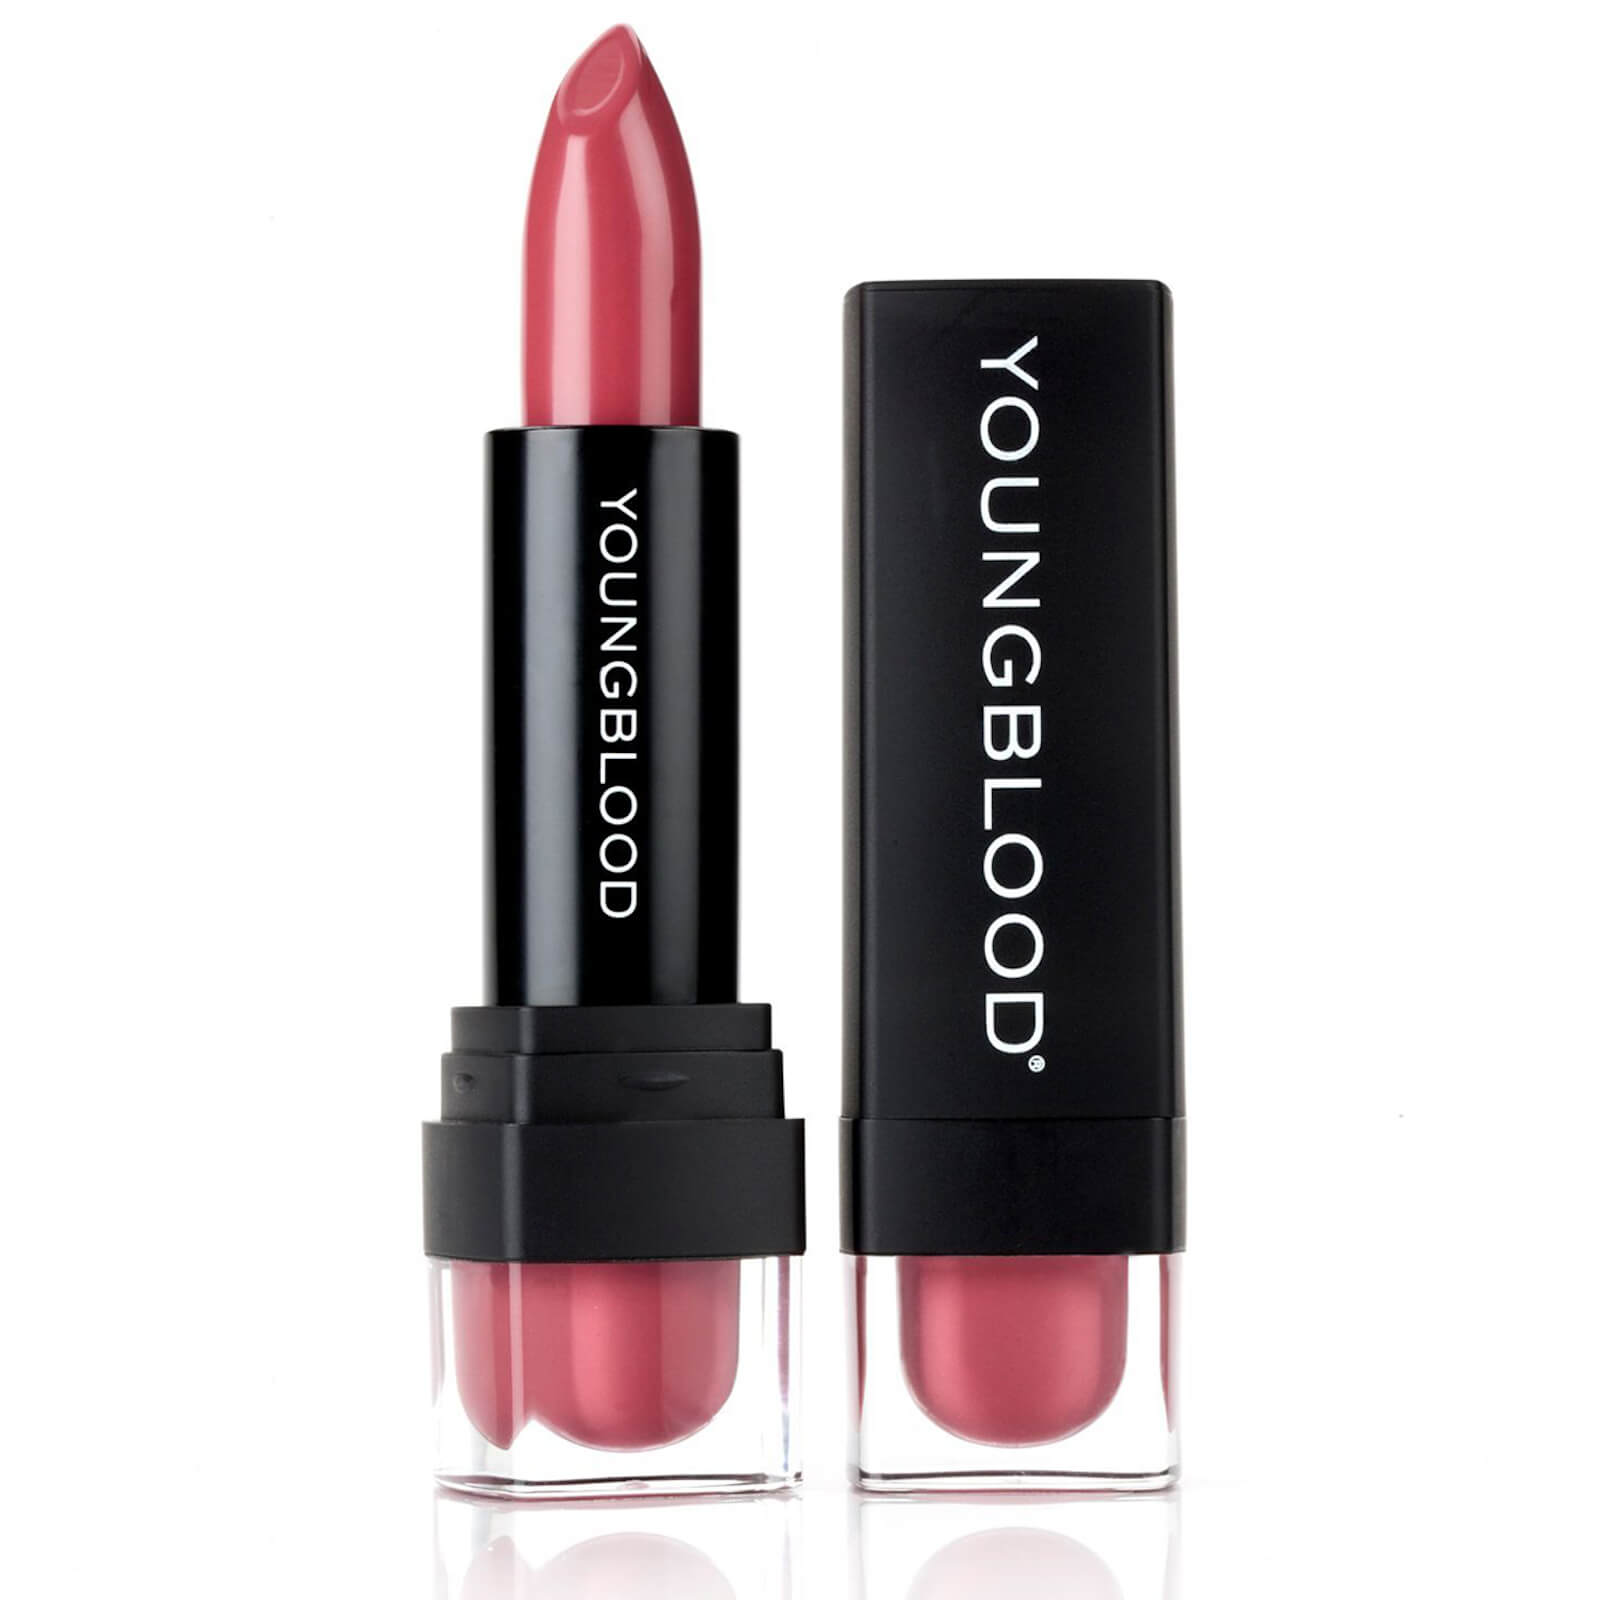 Youngblood Mineral Cosmetics Youngblood Mineral Crème Lipstick 4g (Various Shades) - Rosewater